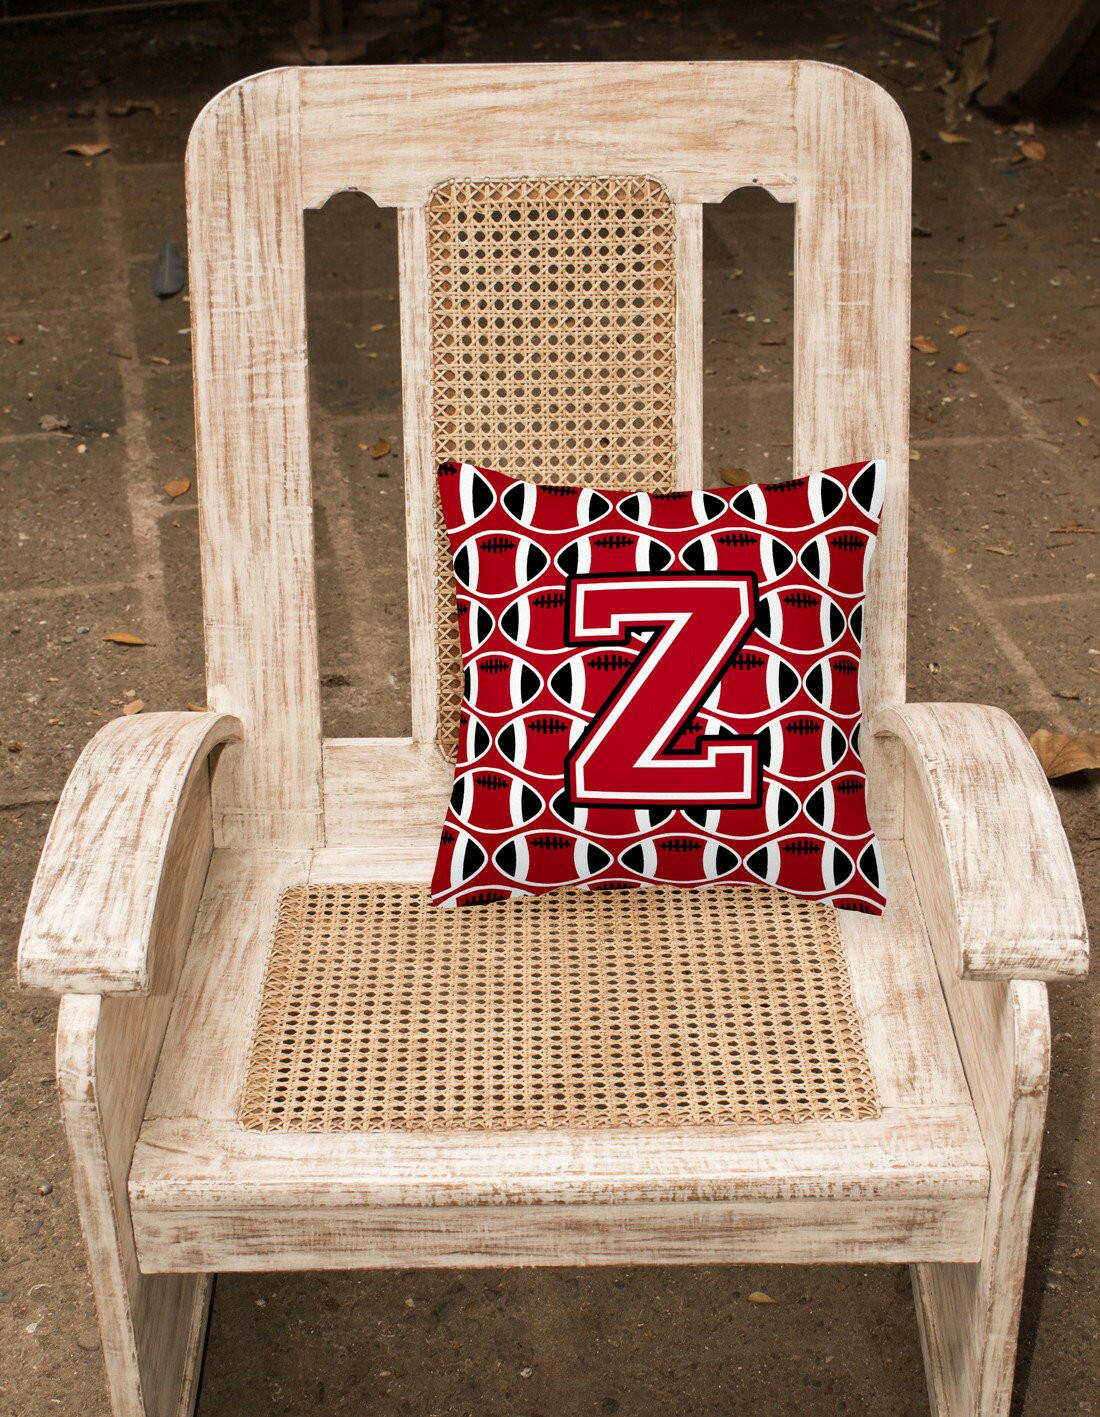 Letter Z Football Red, Black and White Fabric Decorative Pillow CJ1073-ZPW1414 by Caroline's Treasures